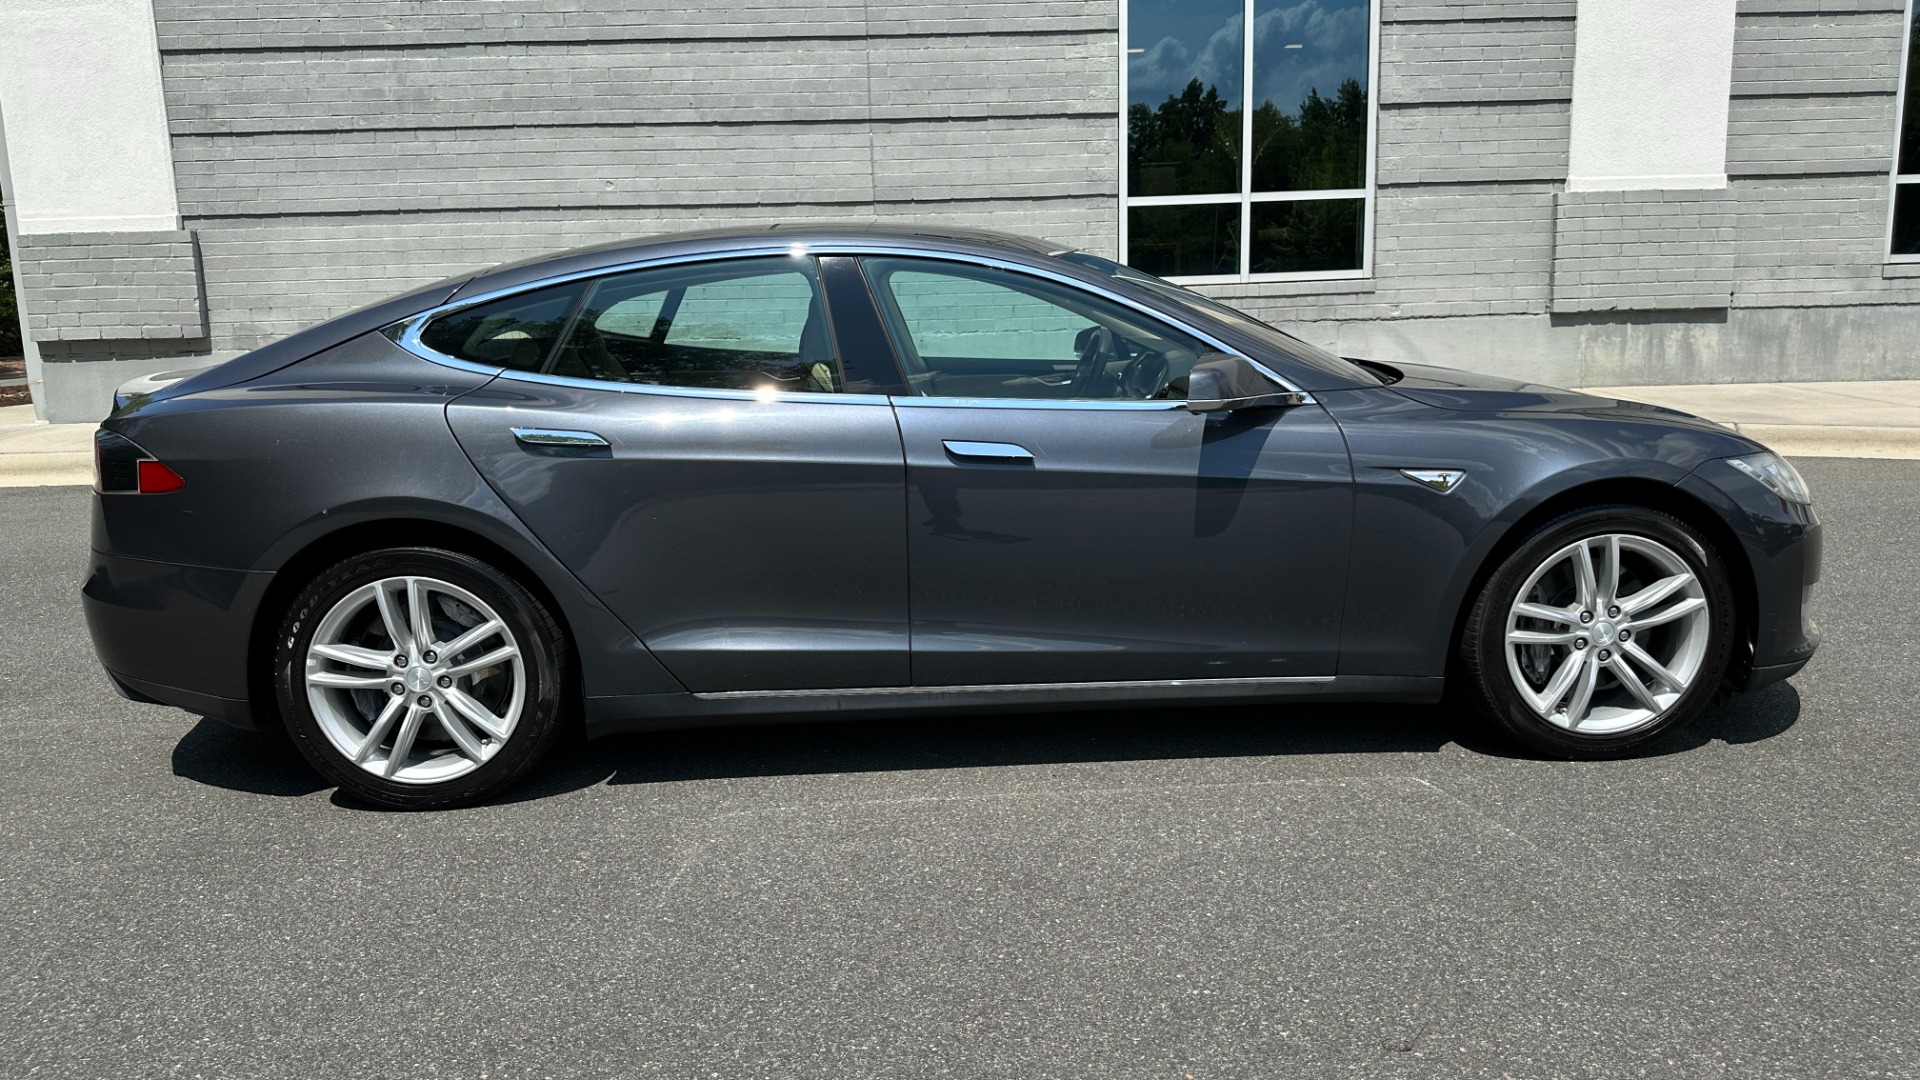 Used 2014 Tesla Model S 60 kWh Battery / 60D / PREMIUM CONNECTIVITY / LEATHER / SUNROOF for sale $19,995 at Formula Imports in Charlotte NC 28227 8